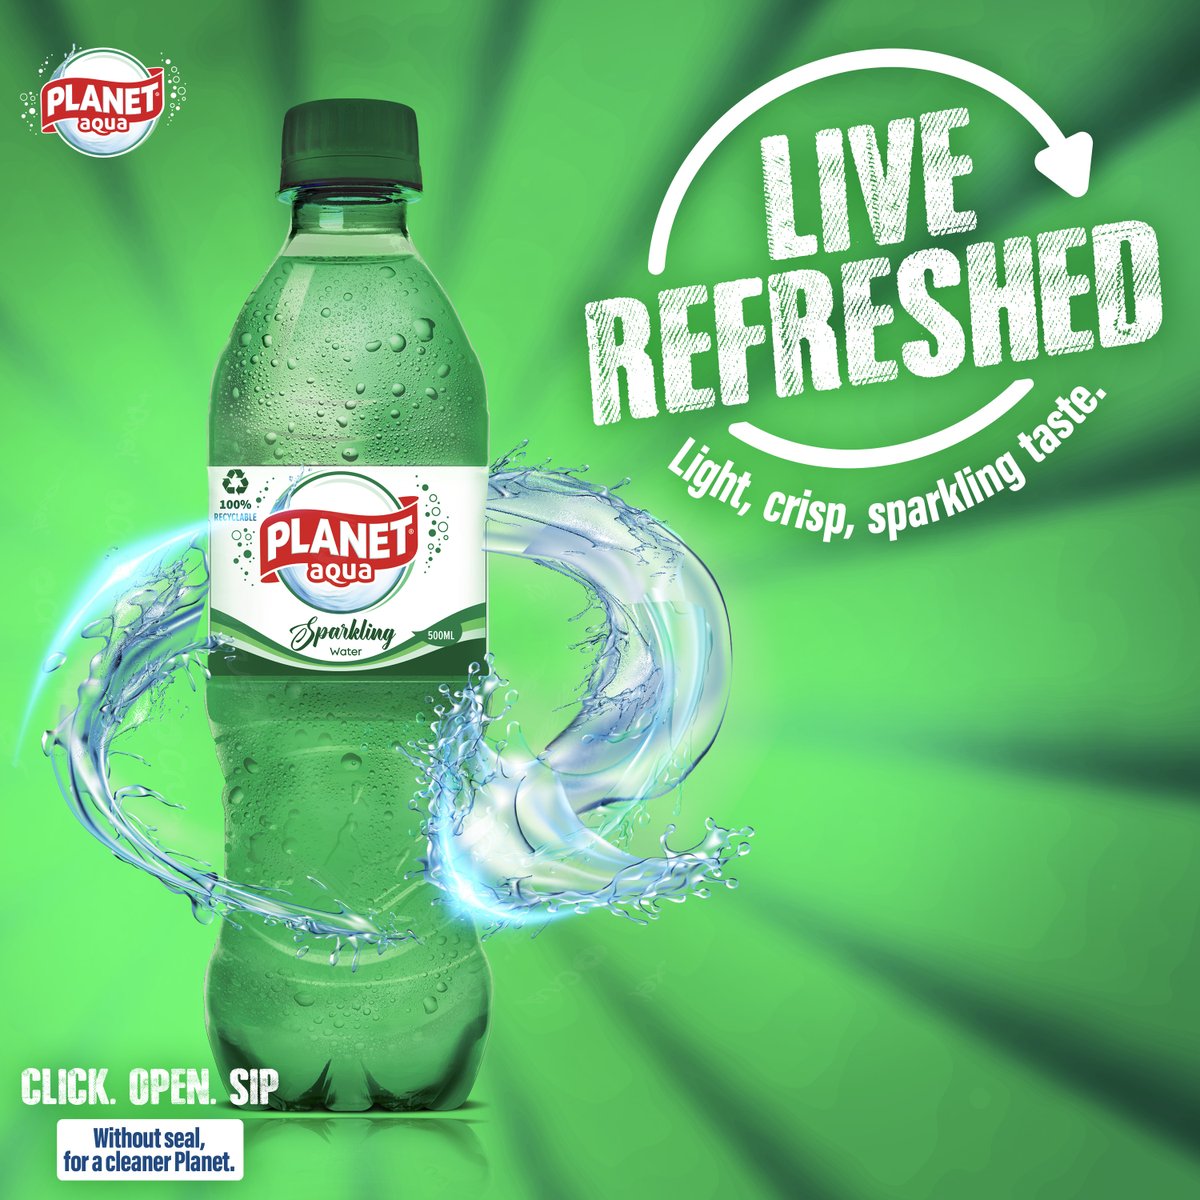 Fizzy hydration with no added calories, introducing Planet Aqua Sparkling Water, just #LiveRefreshed

#WaterAtItsPurest #SparklingWater